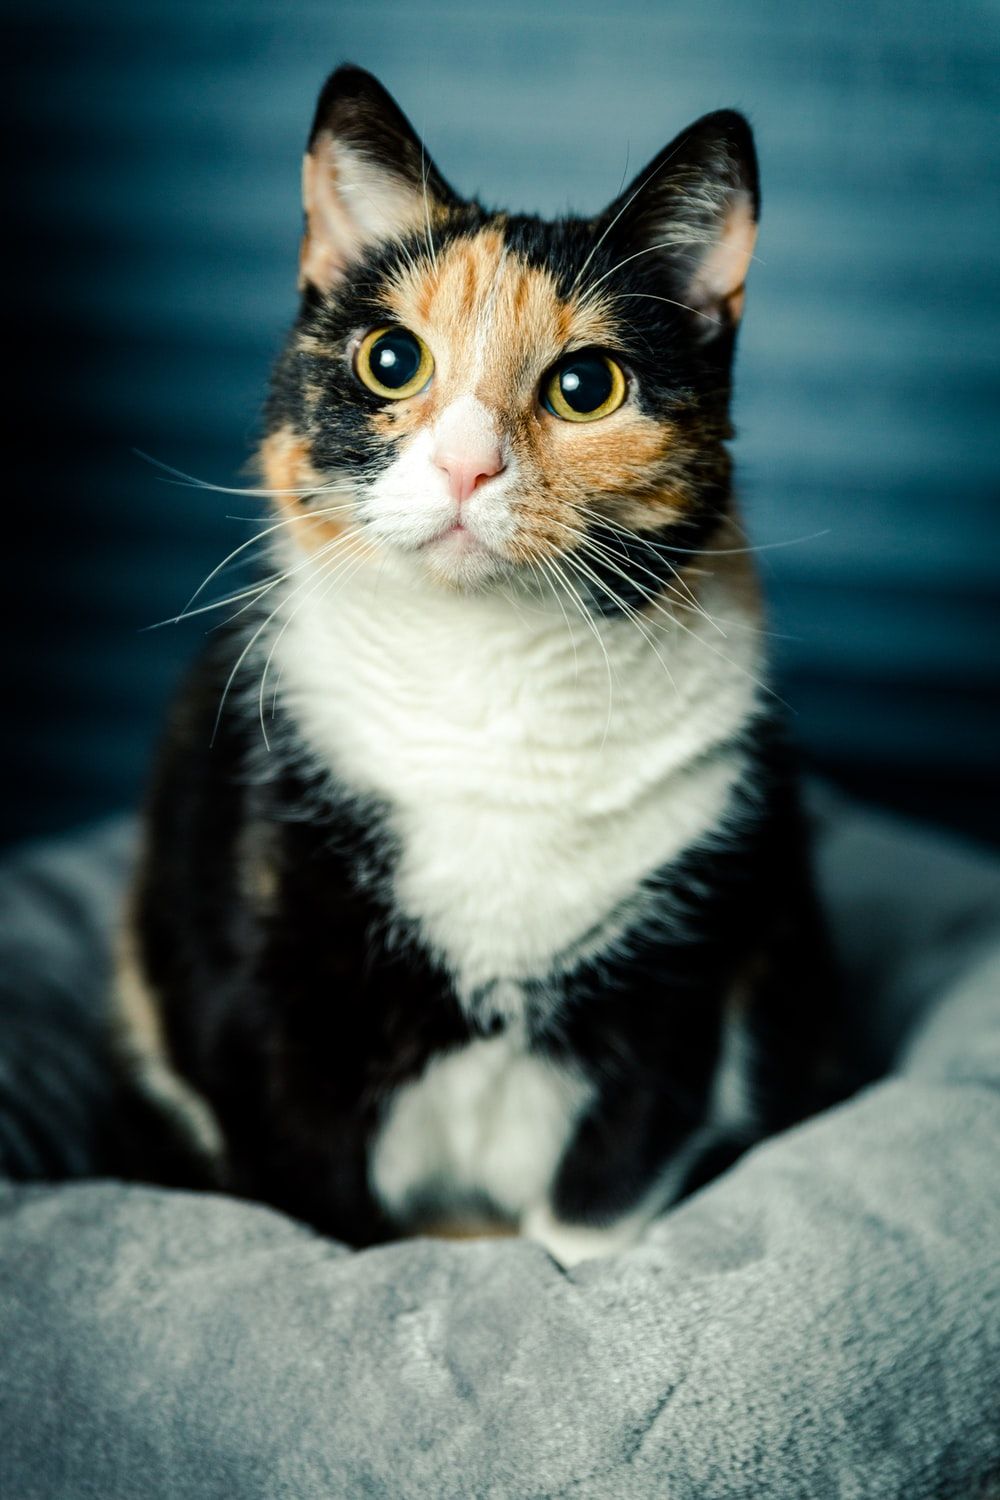 Calico Cat Picture. Download Free Image